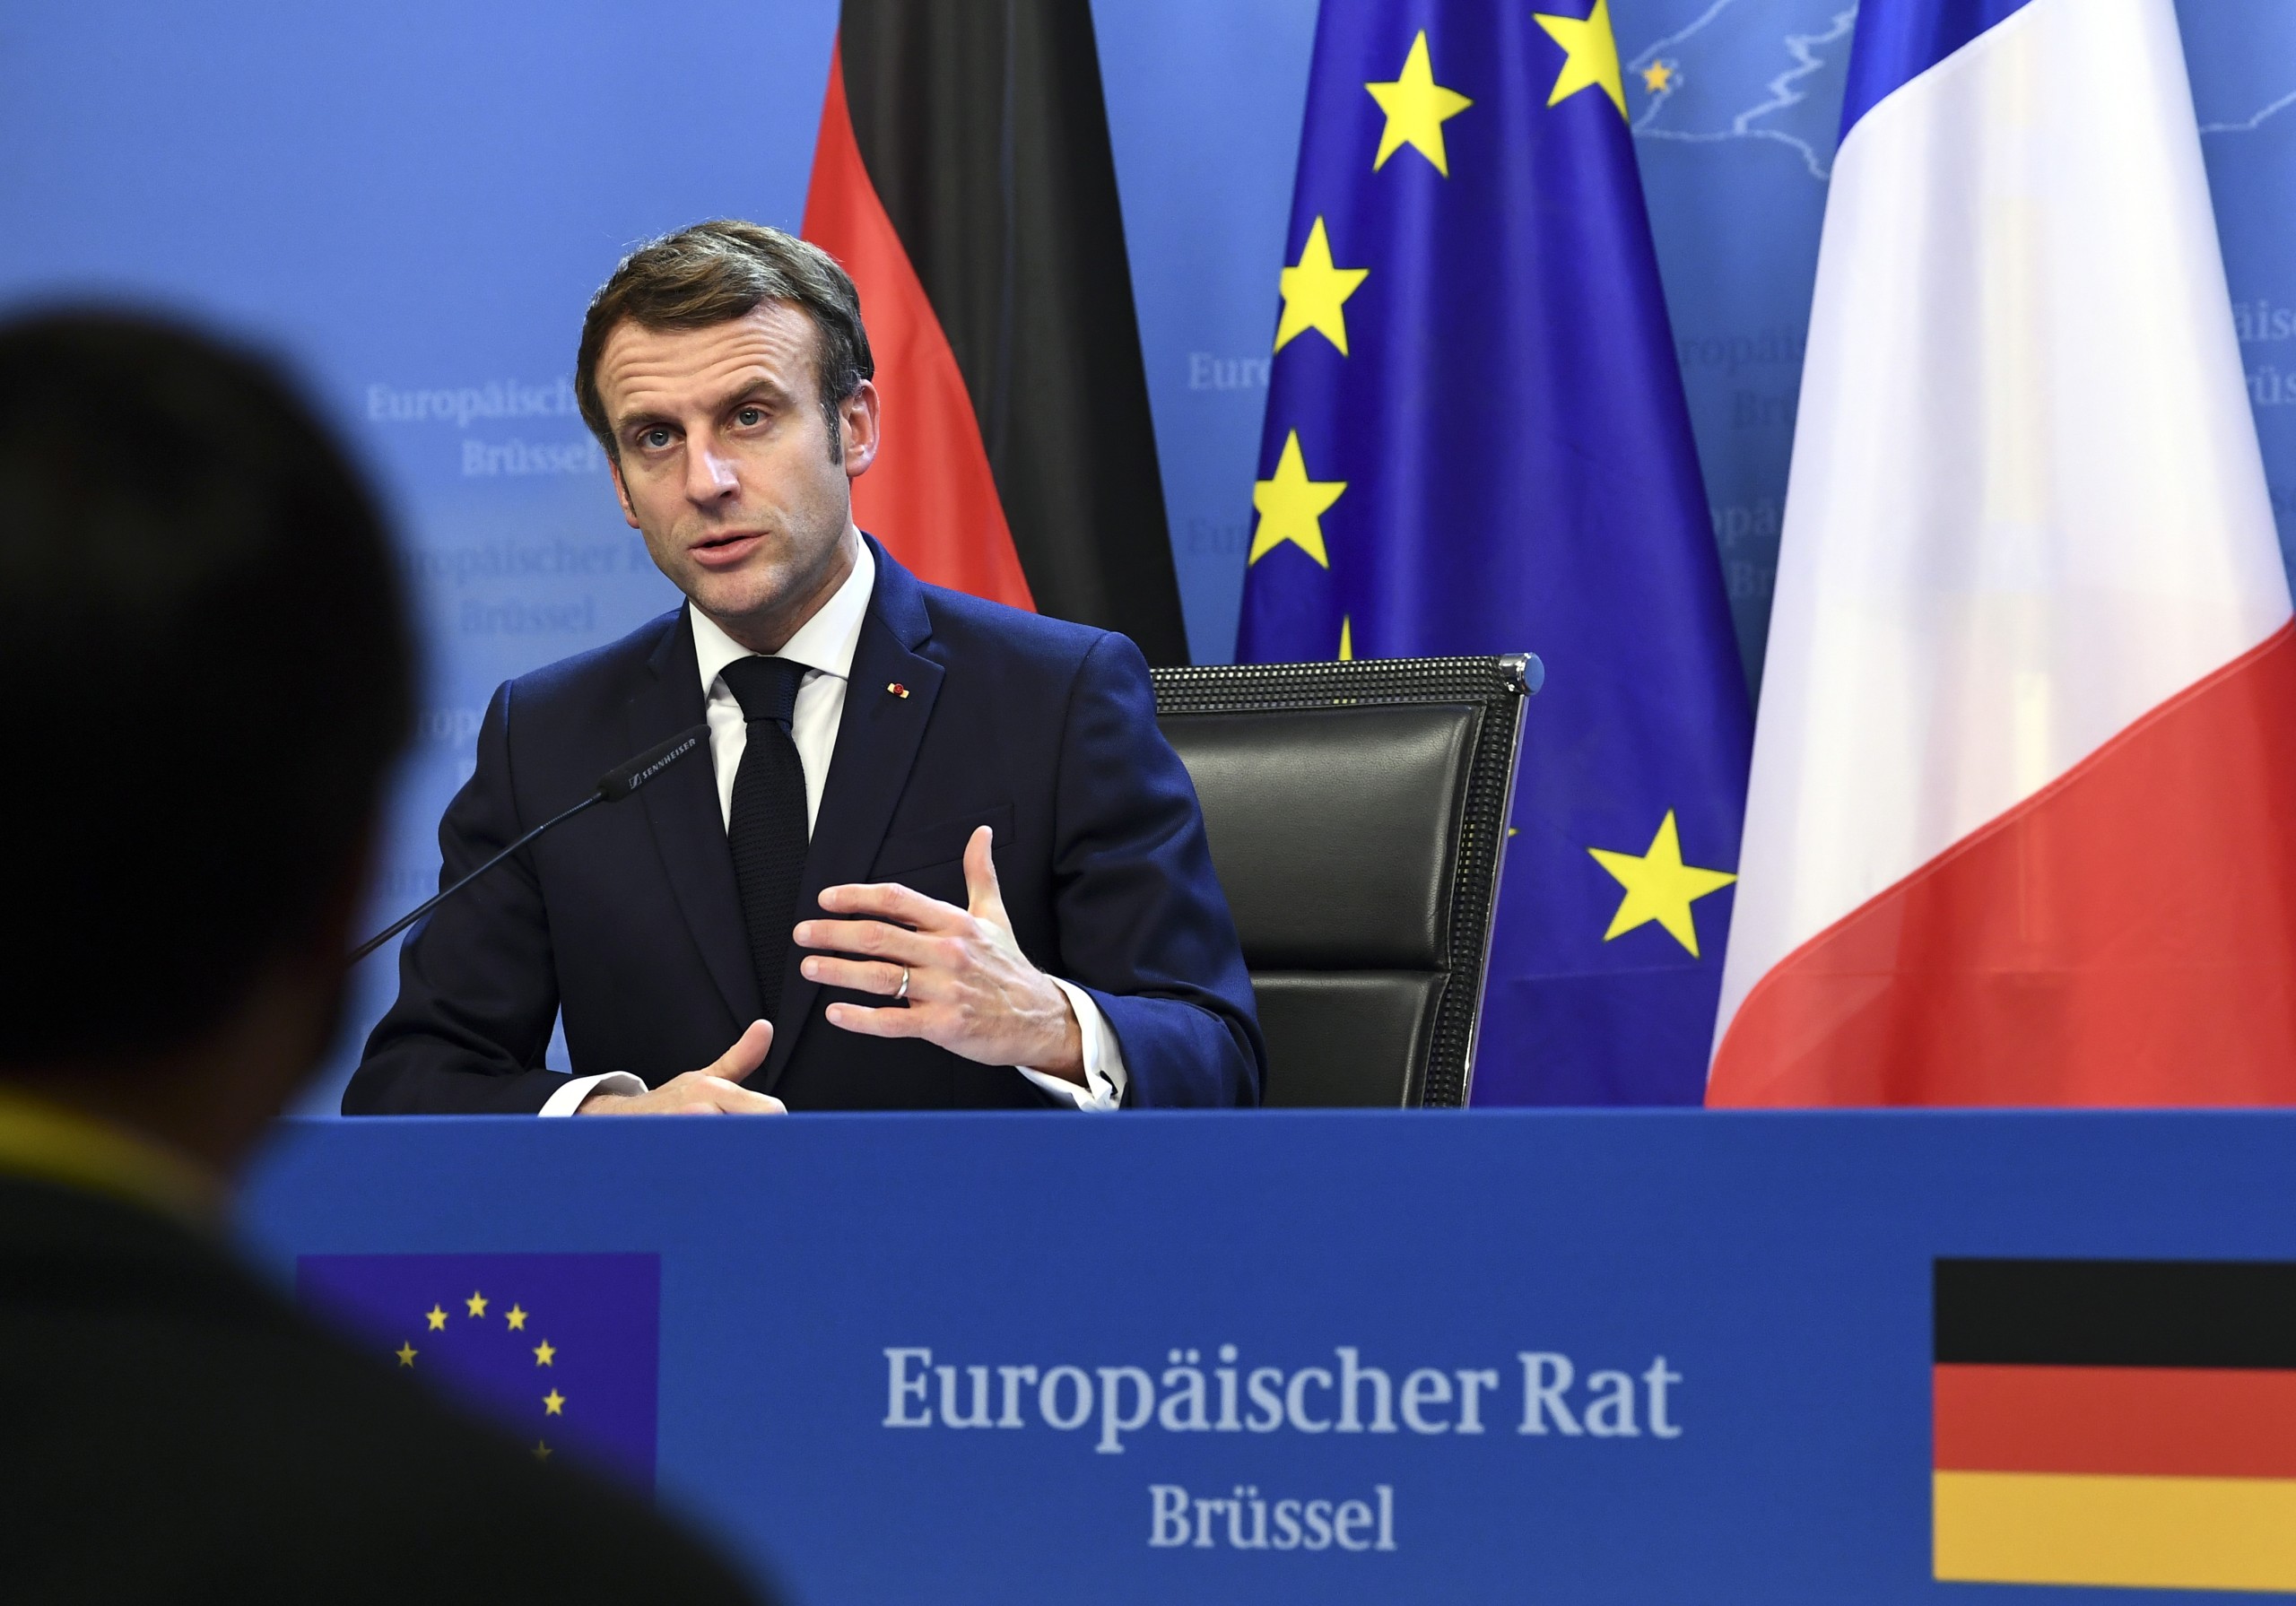 epa09645879 France's President Emmanuel Macron speaks during a joint press conference with Germany's Chancellor Olaf Scholz (out of frame) during an European Union (EU) summit at the European Council Building at the EU headquarters in Brussels, Belgium, 17 December 2021.  EPA/JOHN THYS / POOL